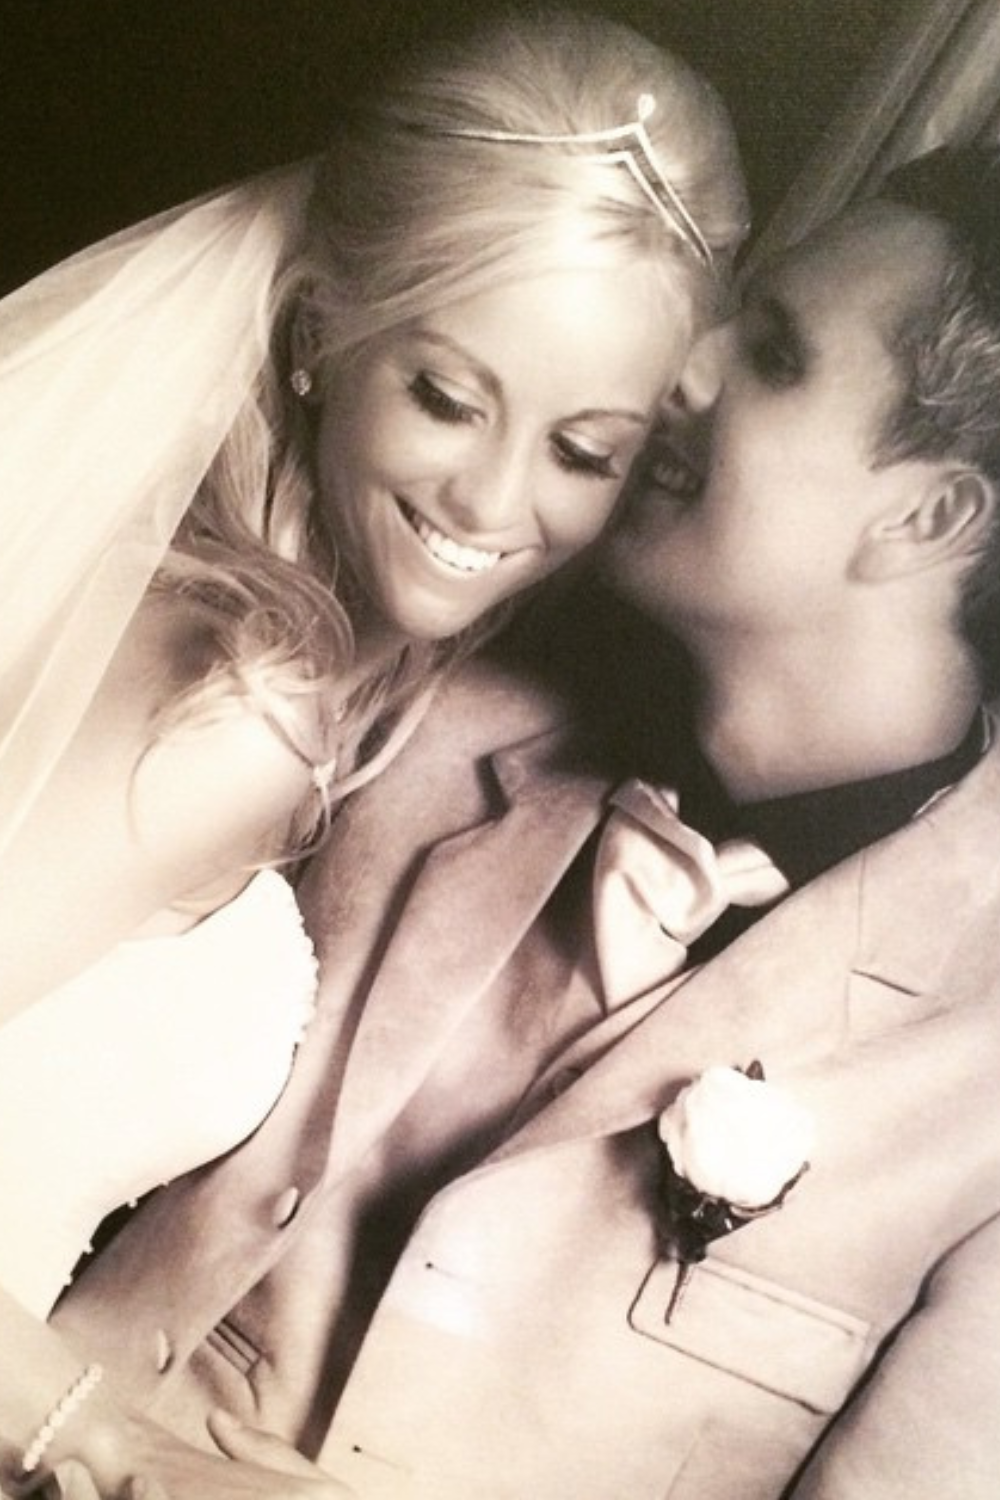 Peter Lovenkrands And His Wife, Teresa Lovenkrands On Their Wedding Day 